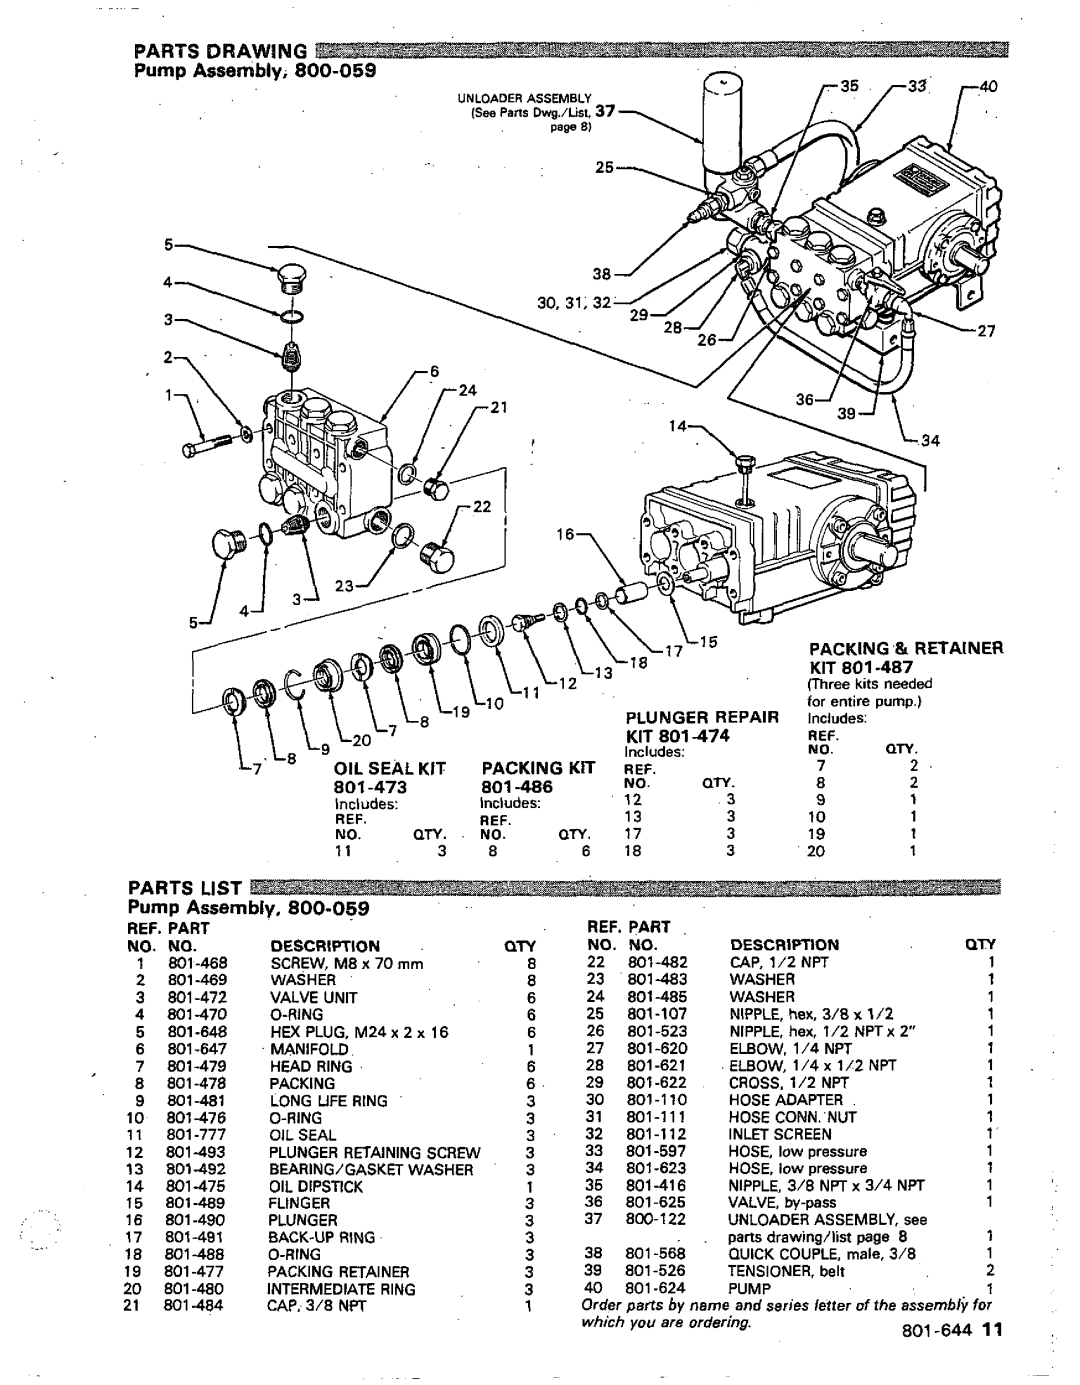 Graco Inc 3245 PARTS LIST Pump Assembly, Plungerrepair, 801-473, Packing.& Retainer, 801-486, Parts Drawing, 801-644 